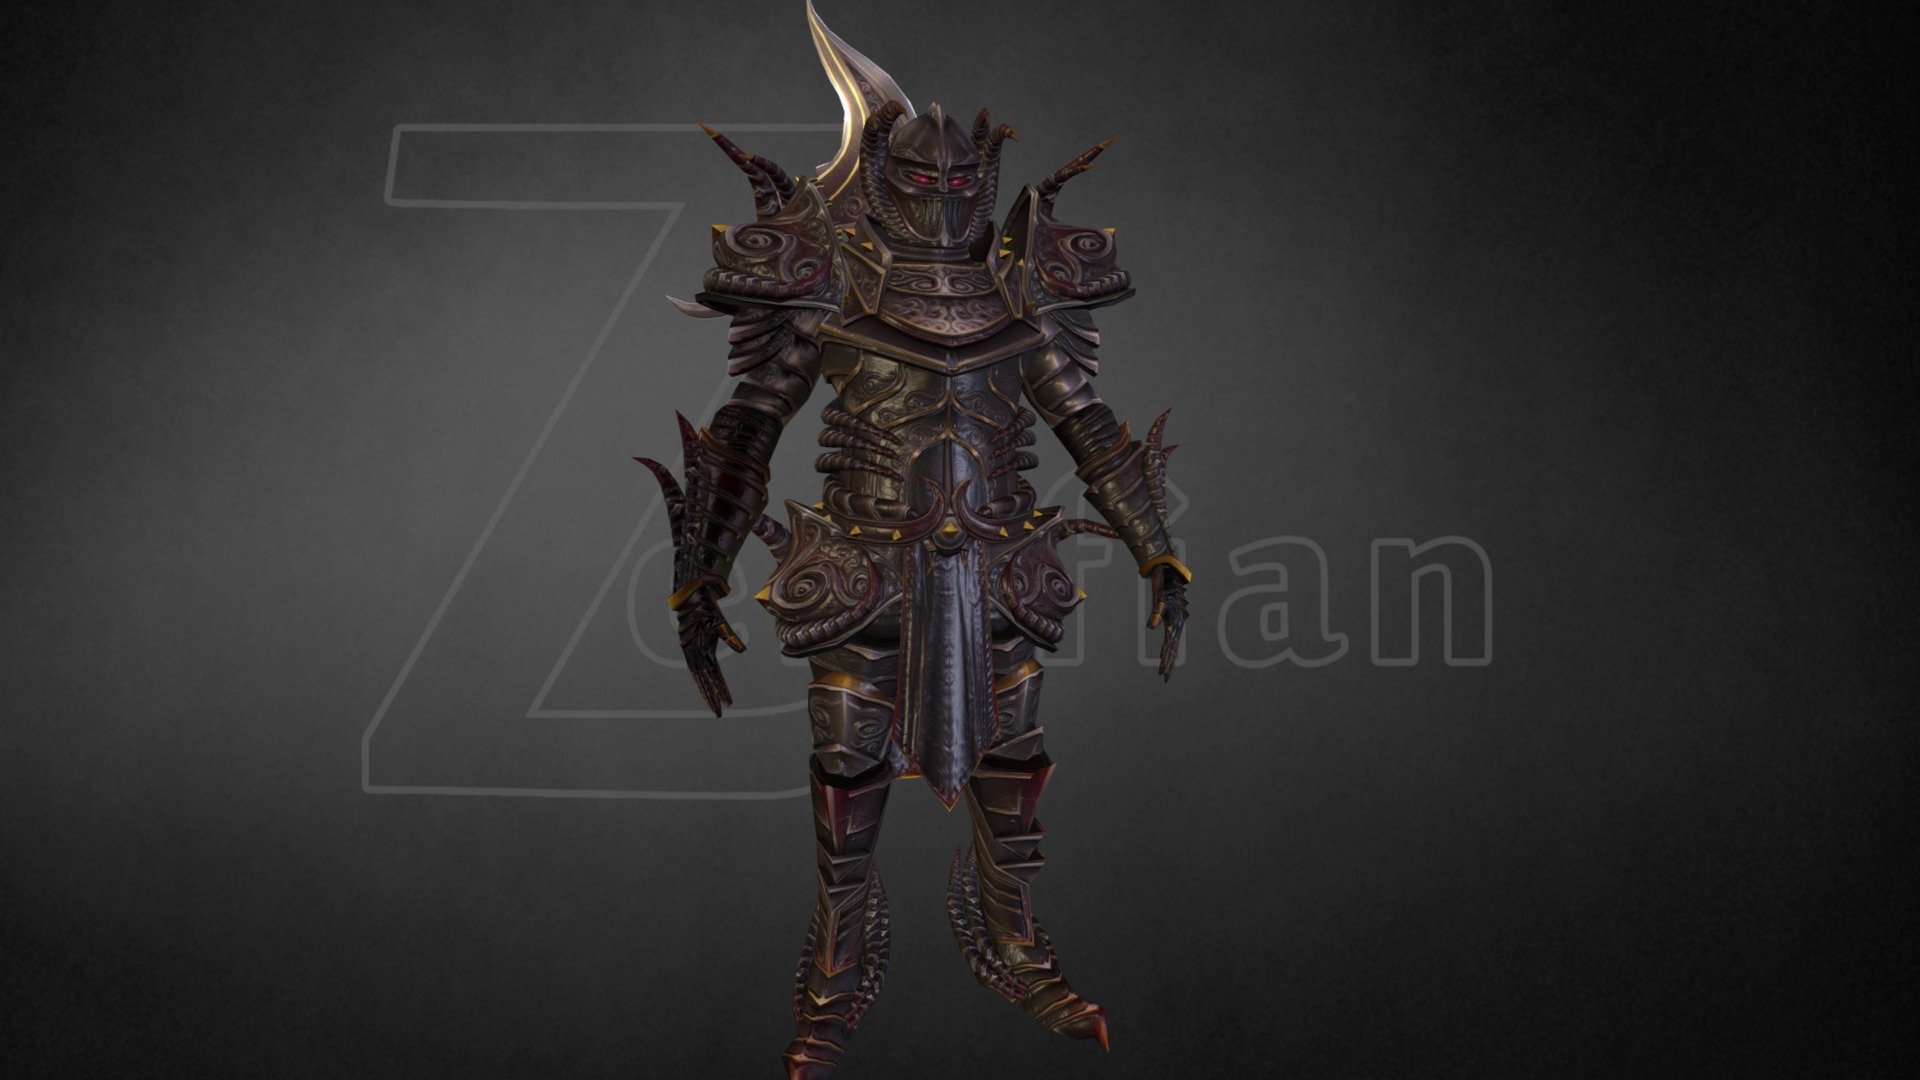 A knight I made for an intel information video. Full 1024x1024 for the body including color, spec, normal, and glow. The helmet and axe are both a 512x512 with the same texture maps as the body 3d model